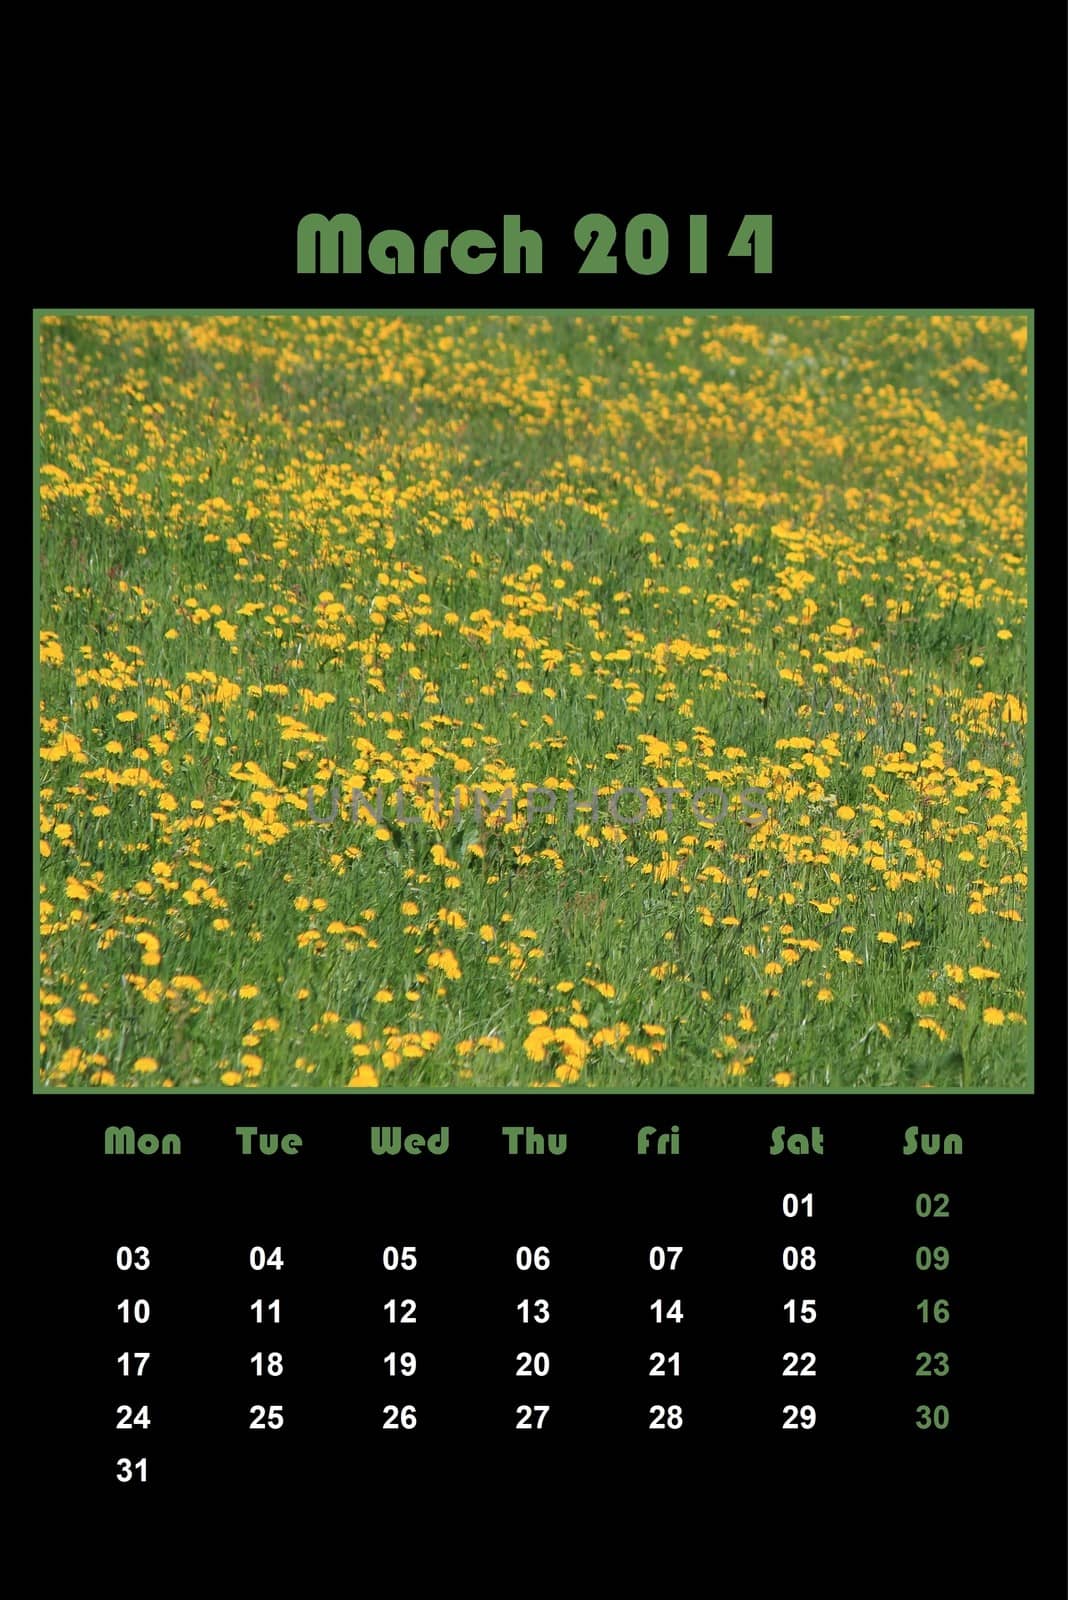 Colorful english calendar for march 2014 in black background, dandelions and green grass